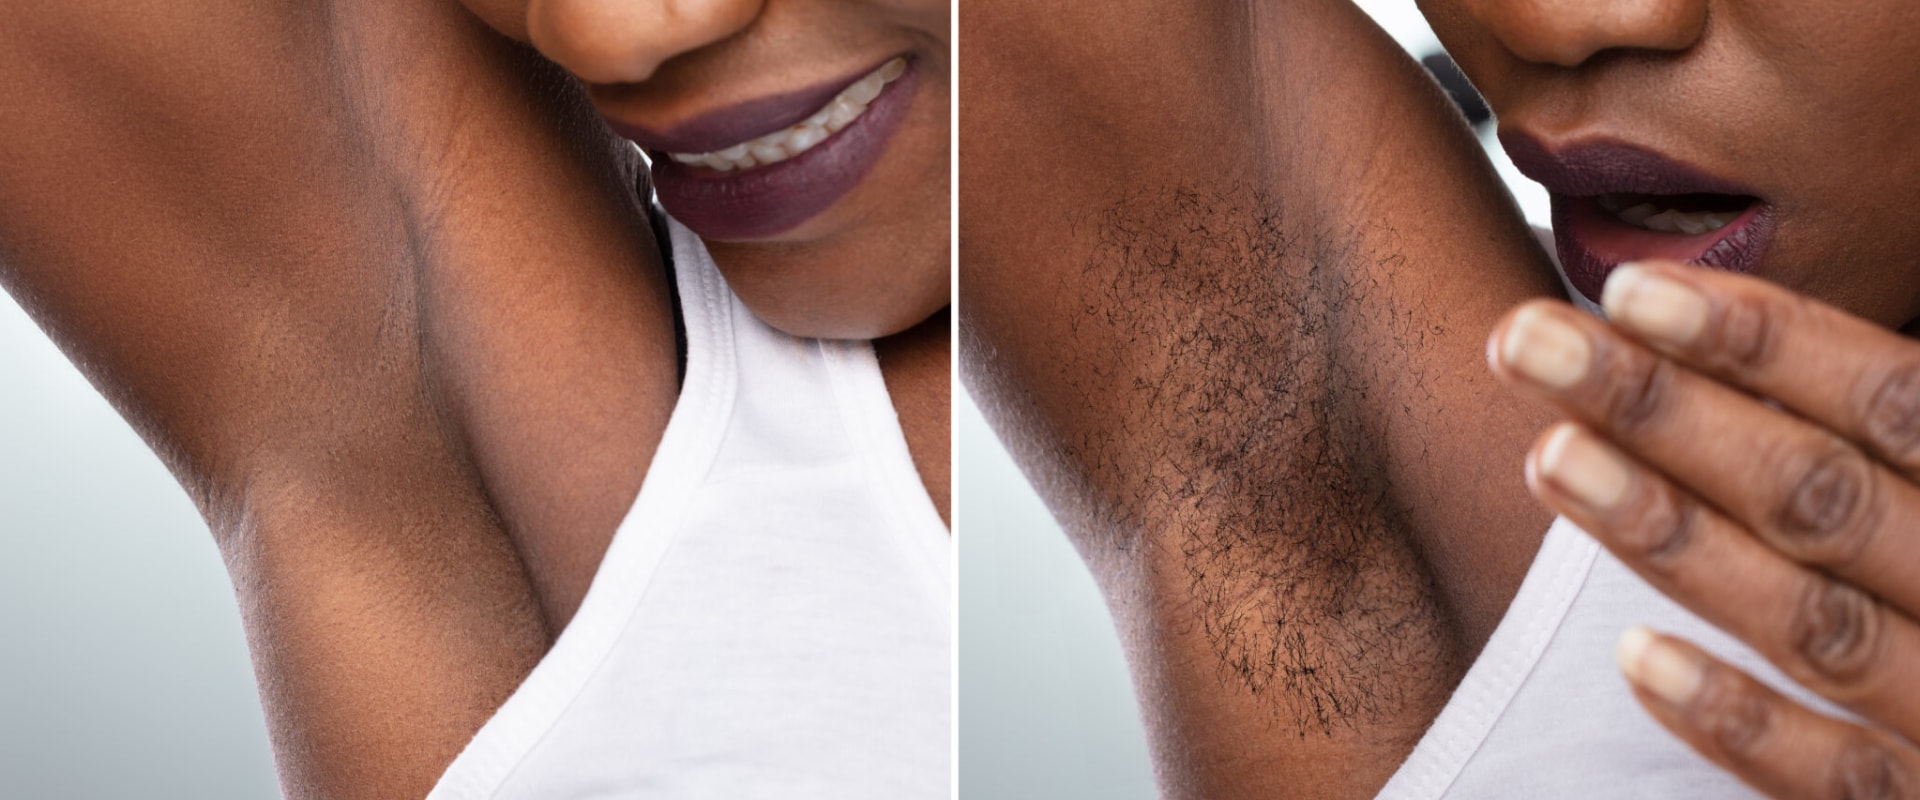 The Potential Risks of Laser Hair Removal on Dark Skinned Patients